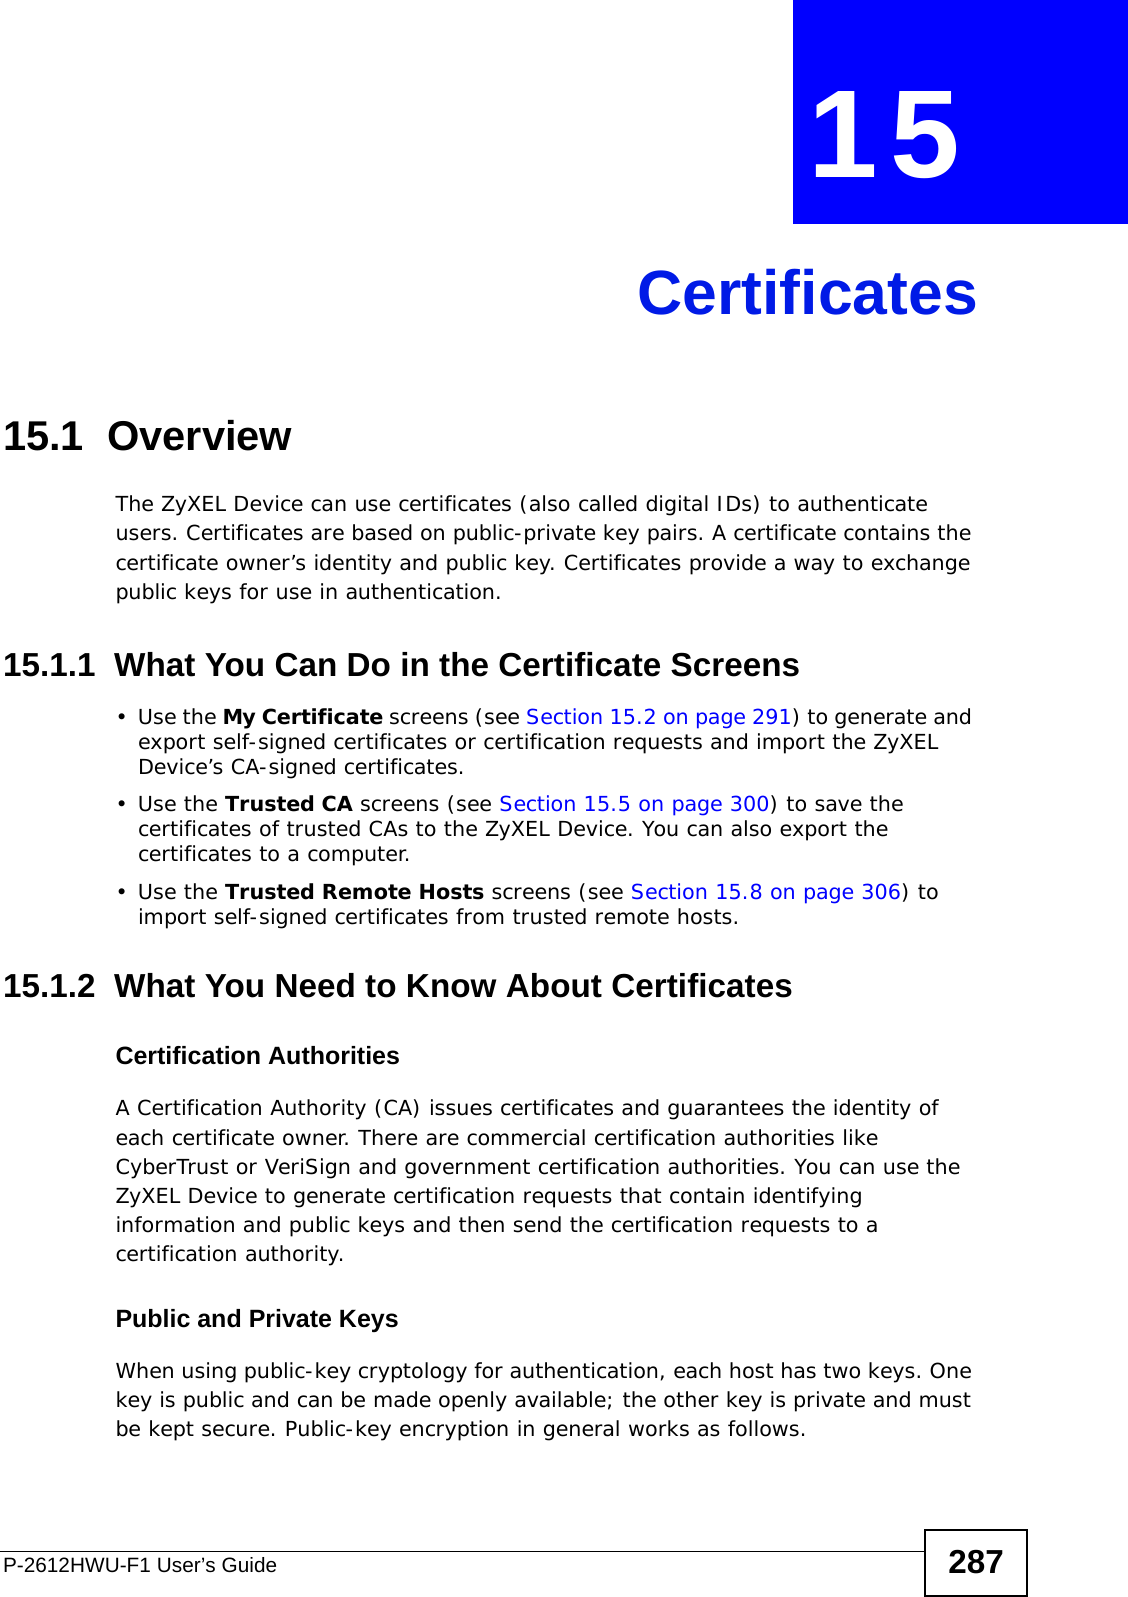 P-2612HWU-F1 User’s Guide 287CHAPTER  15 Certificates15.1  OverviewThe ZyXEL Device can use certificates (also called digital IDs) to authenticate users. Certificates are based on public-private key pairs. A certificate contains the certificate owner’s identity and public key. Certificates provide a way to exchange public keys for use in authentication. 15.1.1  What You Can Do in the Certificate Screens•Use the My Certificate screens (see Section 15.2 on page 291) to generate and export self-signed certificates or certification requests and import the ZyXEL Device’s CA-signed certificates.•Use the Trusted CA screens (see Section 15.5 on page 300) to save the certificates of trusted CAs to the ZyXEL Device. You can also export the certificates to a computer.•Use the Trusted Remote Hosts screens (see Section 15.8 on page 306) to import self-signed certificates from trusted remote hosts.15.1.2  What You Need to Know About CertificatesCertification AuthoritiesA Certification Authority (CA) issues certificates and guarantees the identity of each certificate owner. There are commercial certification authorities like CyberTrust or VeriSign and government certification authorities. You can use the ZyXEL Device to generate certification requests that contain identifying information and public keys and then send the certification requests to a certification authority. Public and Private KeysWhen using public-key cryptology for authentication, each host has two keys. One key is public and can be made openly available; the other key is private and must be kept secure. Public-key encryption in general works as follows. 